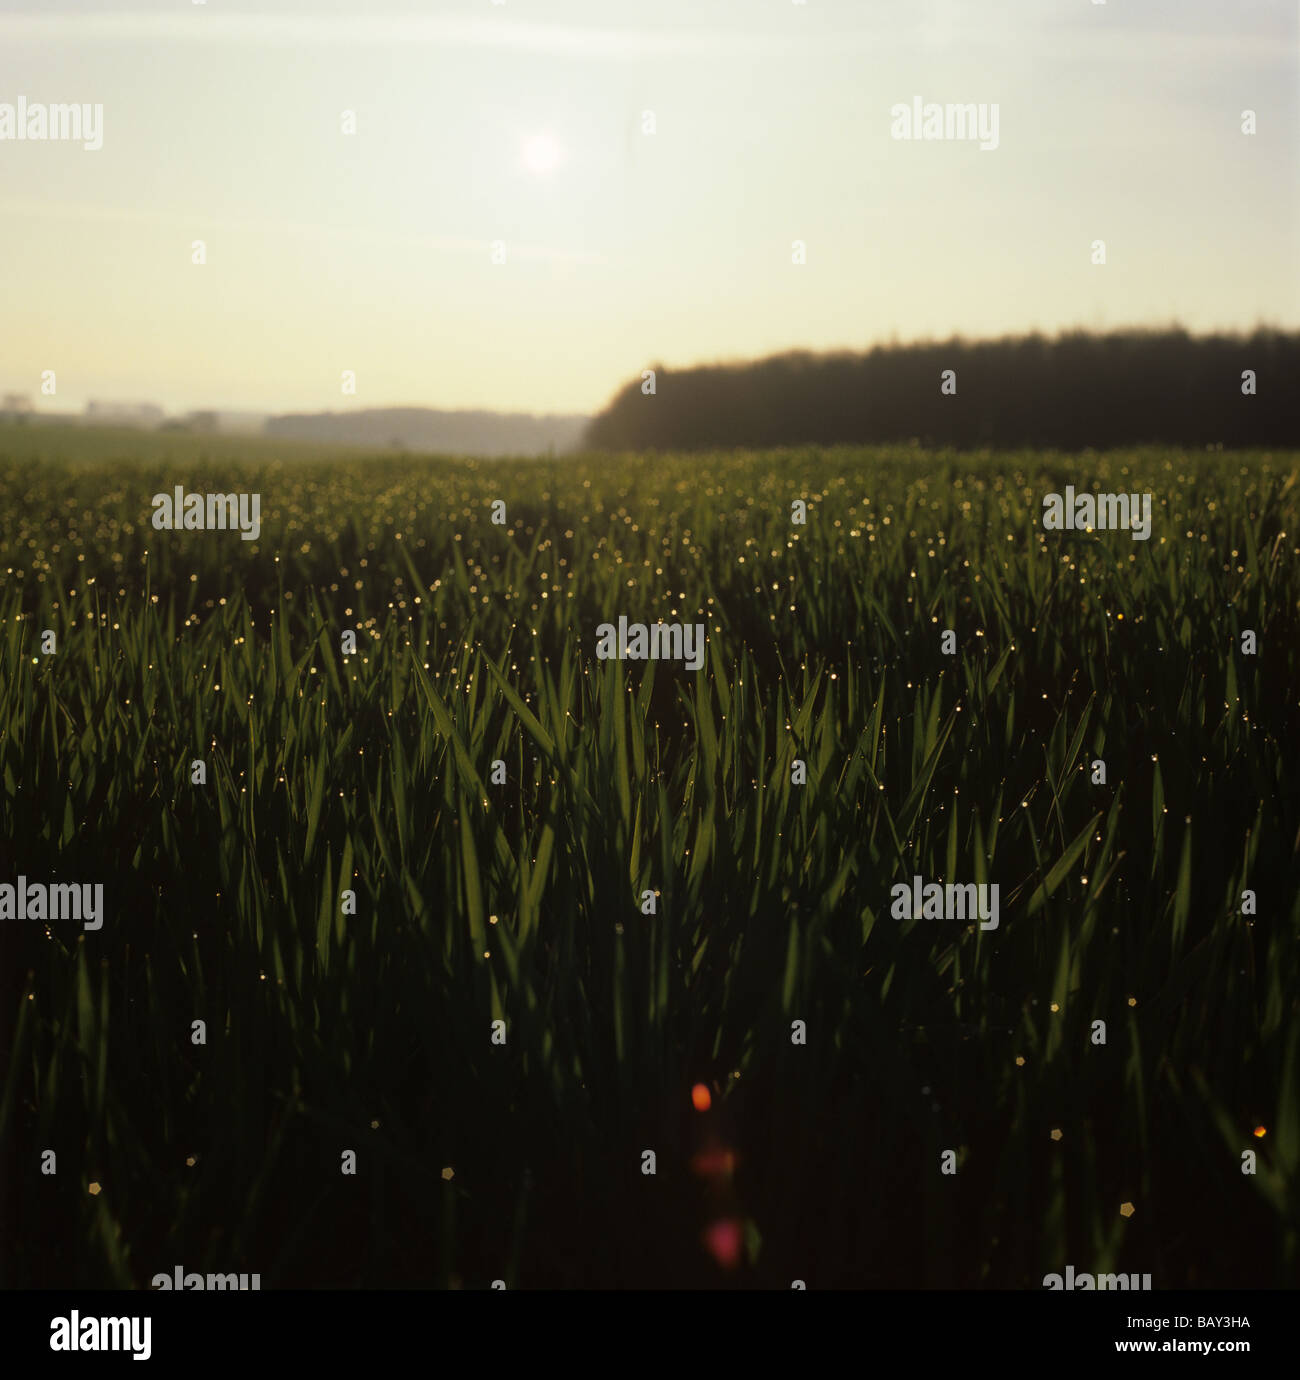 Dew droplets on a barley crop in early morning sunlight Berkshire Stock Photo